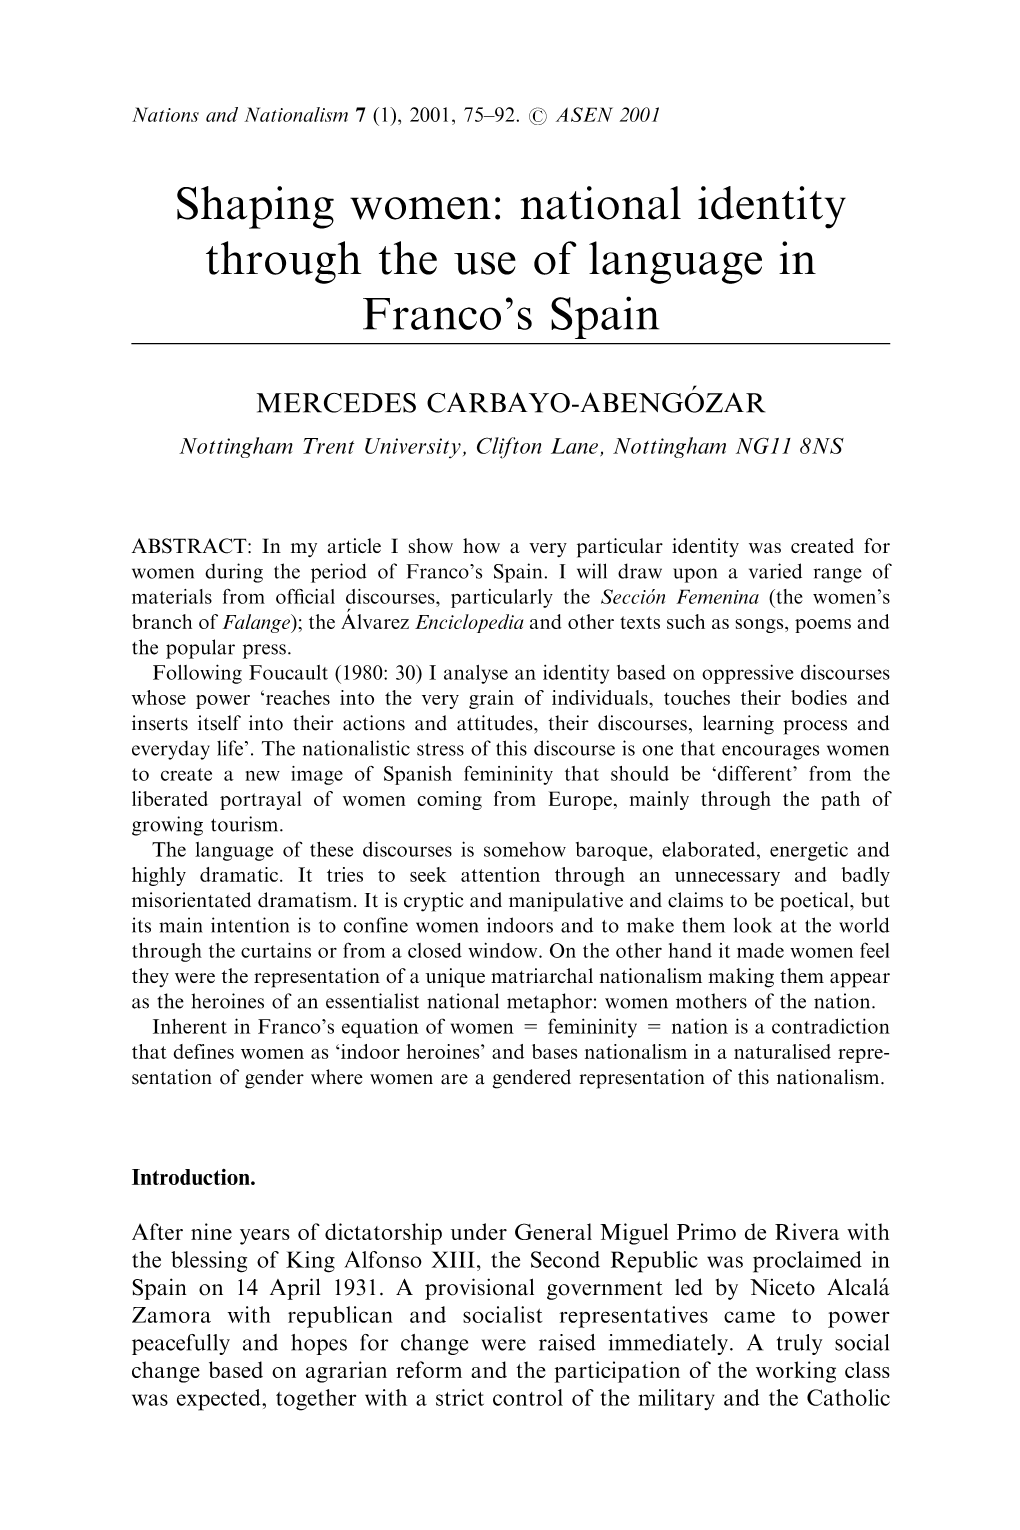 Shaping Women: National Identity Through the Use of Language in Franco's Spain